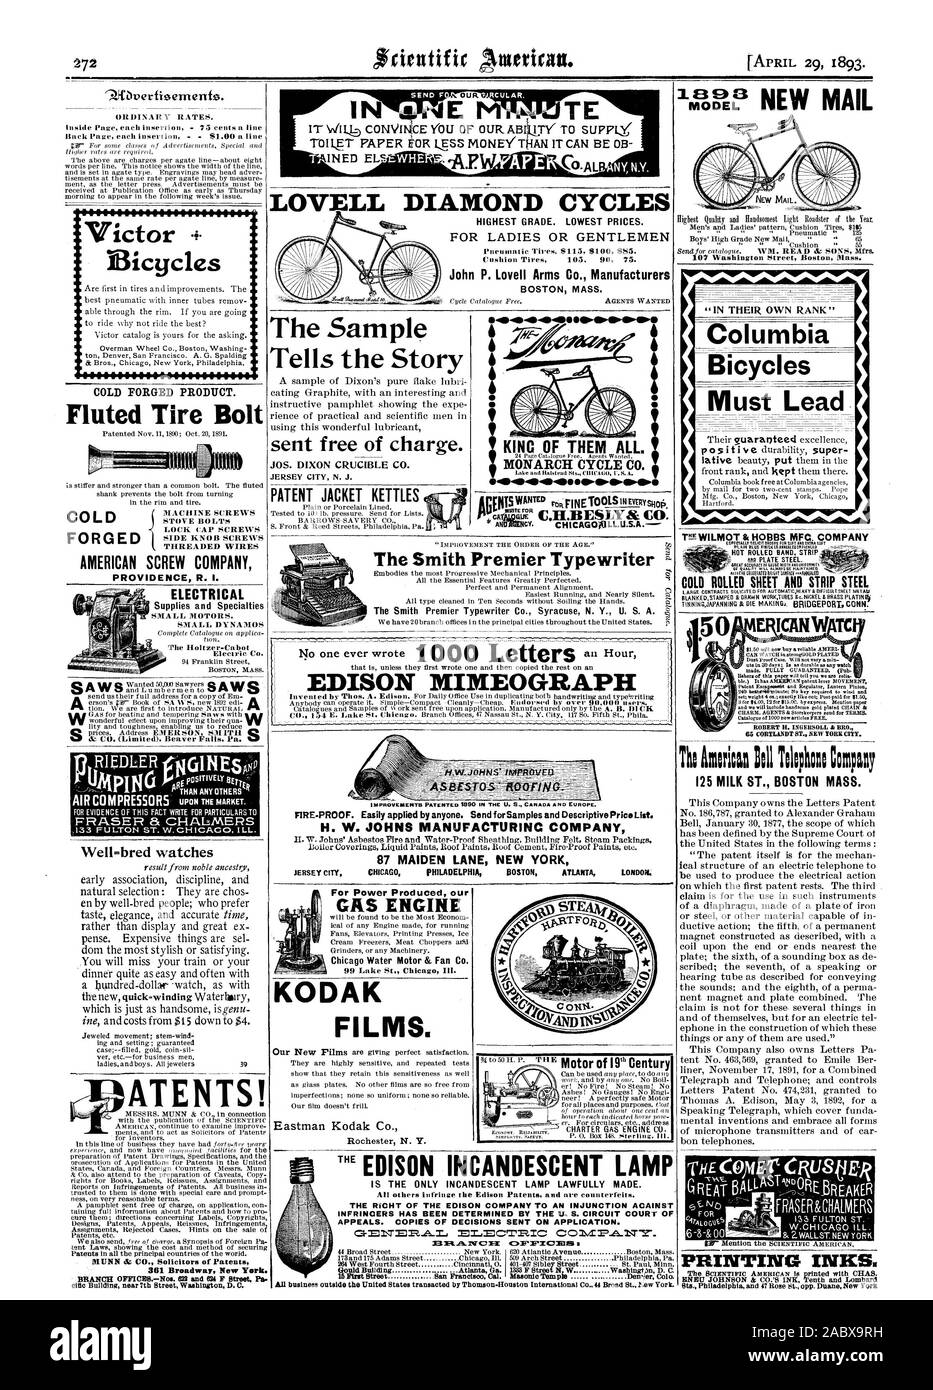 HIGHEST GRADE. LOWEST PRICES. John P. Lovell Arms Co. Manufacturers BOSTON MASS. LOVELL DIAMOND CYCLES ATENTS! The Sample Tells the Story JOS. DIXON CRUCIBLE CO. PATENT JACKET KETTLES 'IN THEIR OWN RANK' Columbia Bicycles . Must  Lead.  65 CORTLANIIT ST. NEW YORK RIM Tlu Am:rican  T:1:phou Compap 125 MILK ST. BOSTON MASS. PRINTING INKS' Bicycles Fluted Tire Bolt AMERICAN SCREW COMPANY PROVIDENCE R. I. ELECTRICAL Well=bred watches COLD 0  KINC OF THEM ALL. MONARCH CYCLE CO. COLD ROLLED SHEET AND STRIP STEEL LLASTr 4RE BREAKER The Smith Premier Typewriter The Smith Premier Typewriter Co Stock Photo